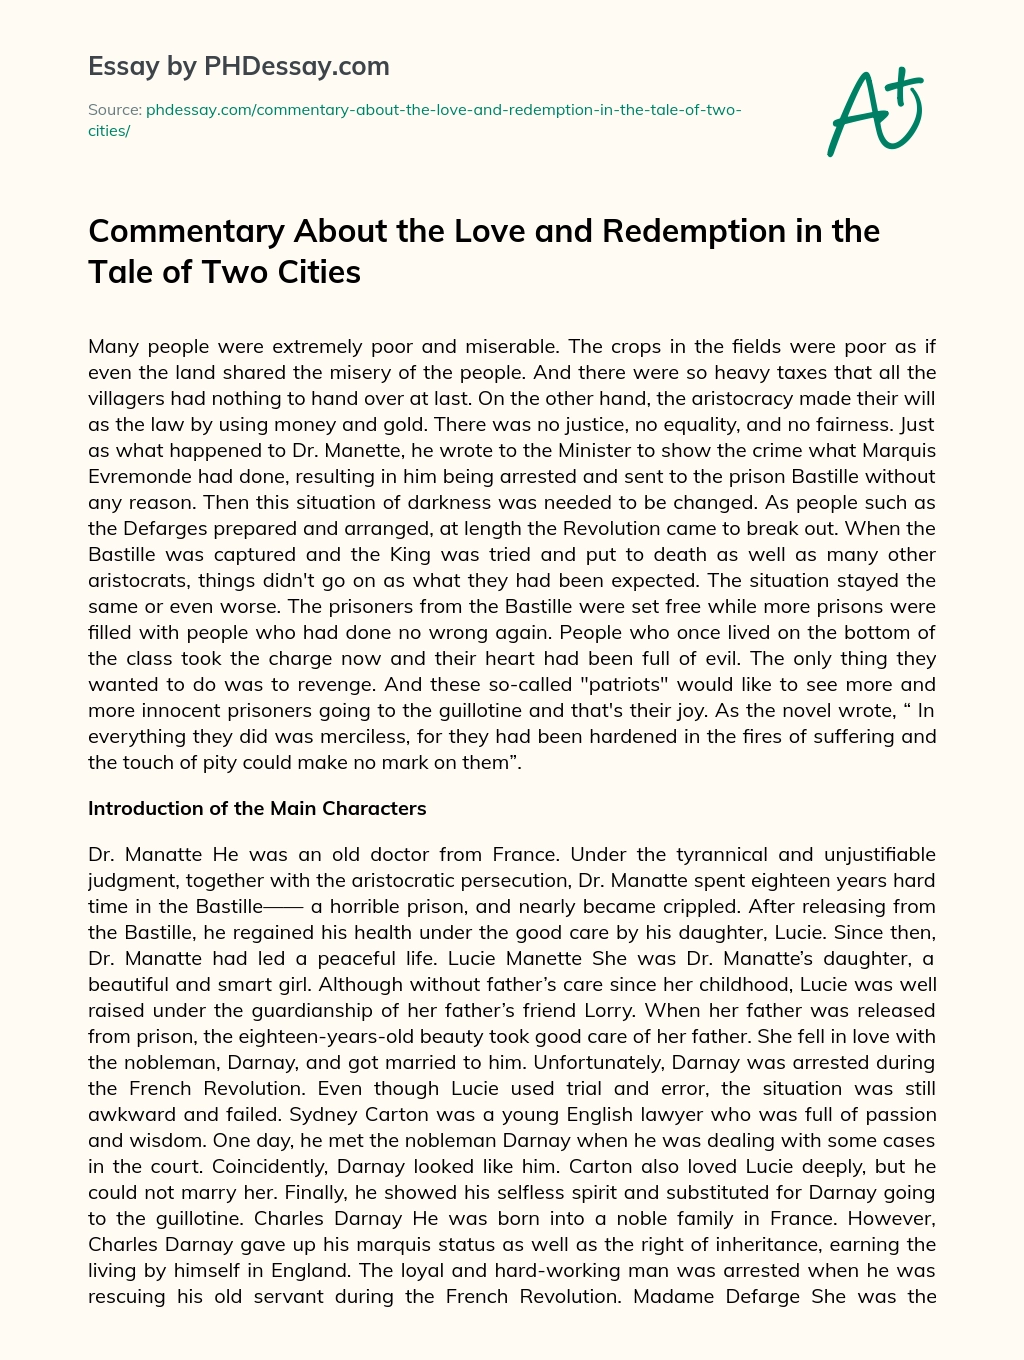 Commentary About the Love and Redemption in the Tale of Two Cities essay